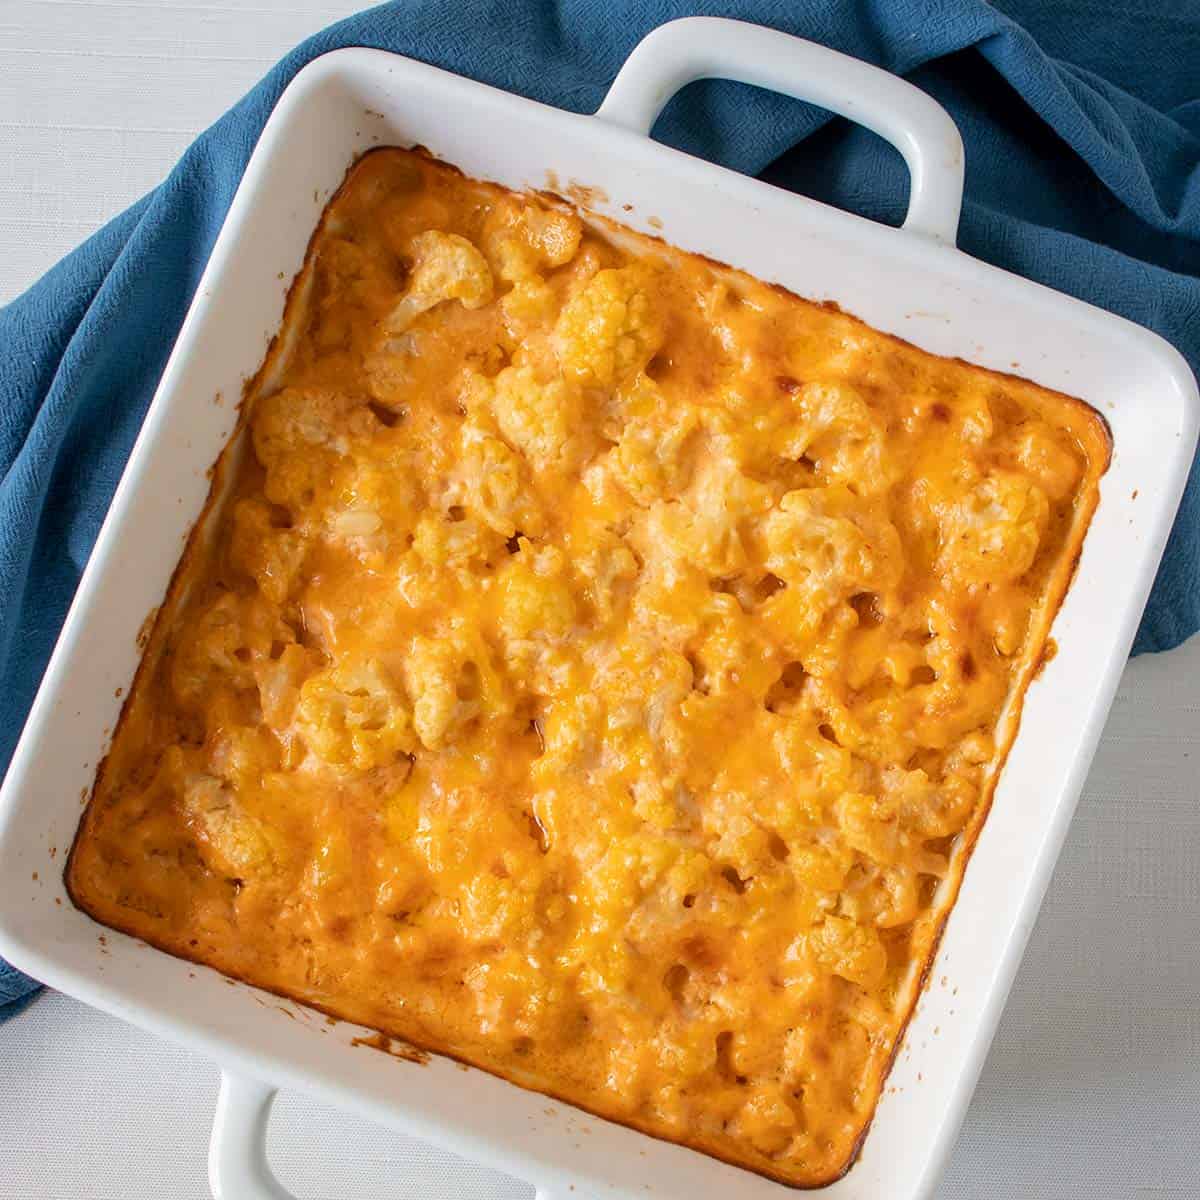 cauliflower mac and cheese after it's been baked in the oven in square white baking pan.